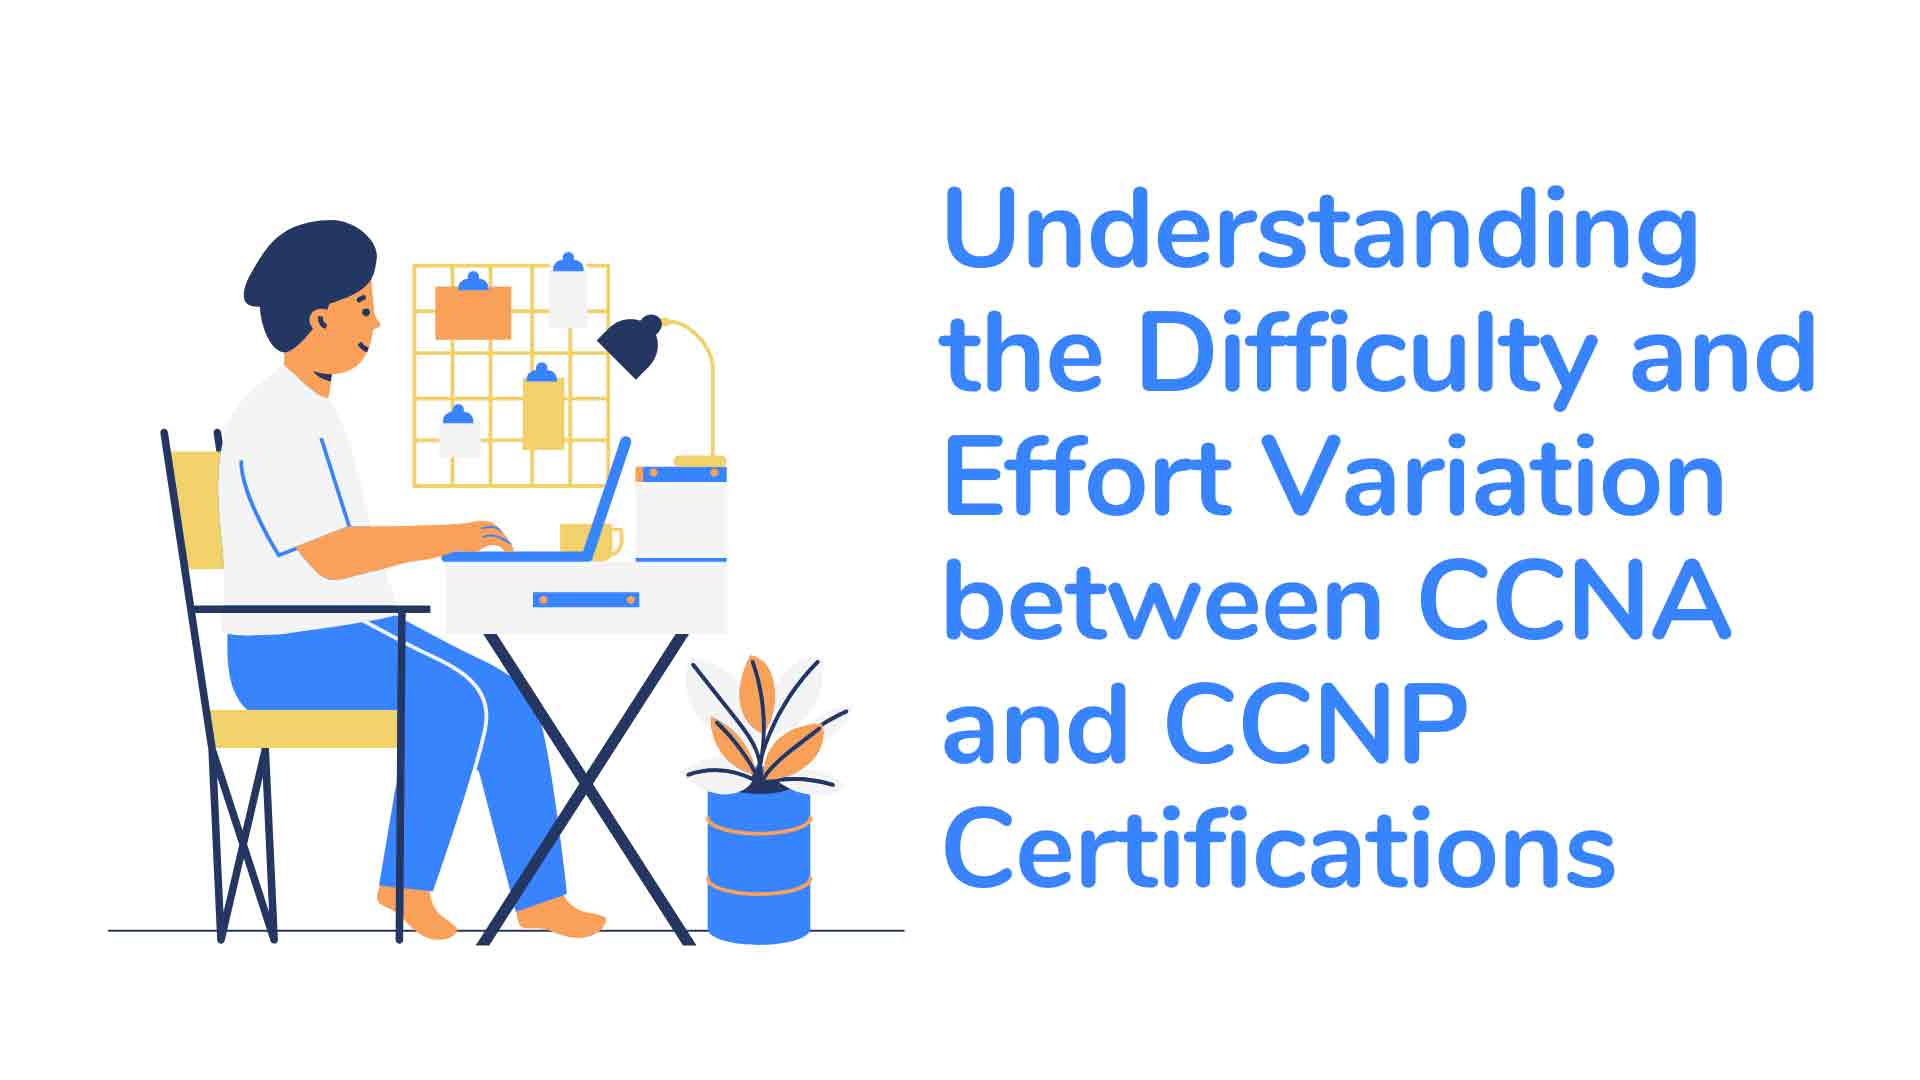 Understanding the Difficulty and Effort Variation between CCNA and CCNP Certifications